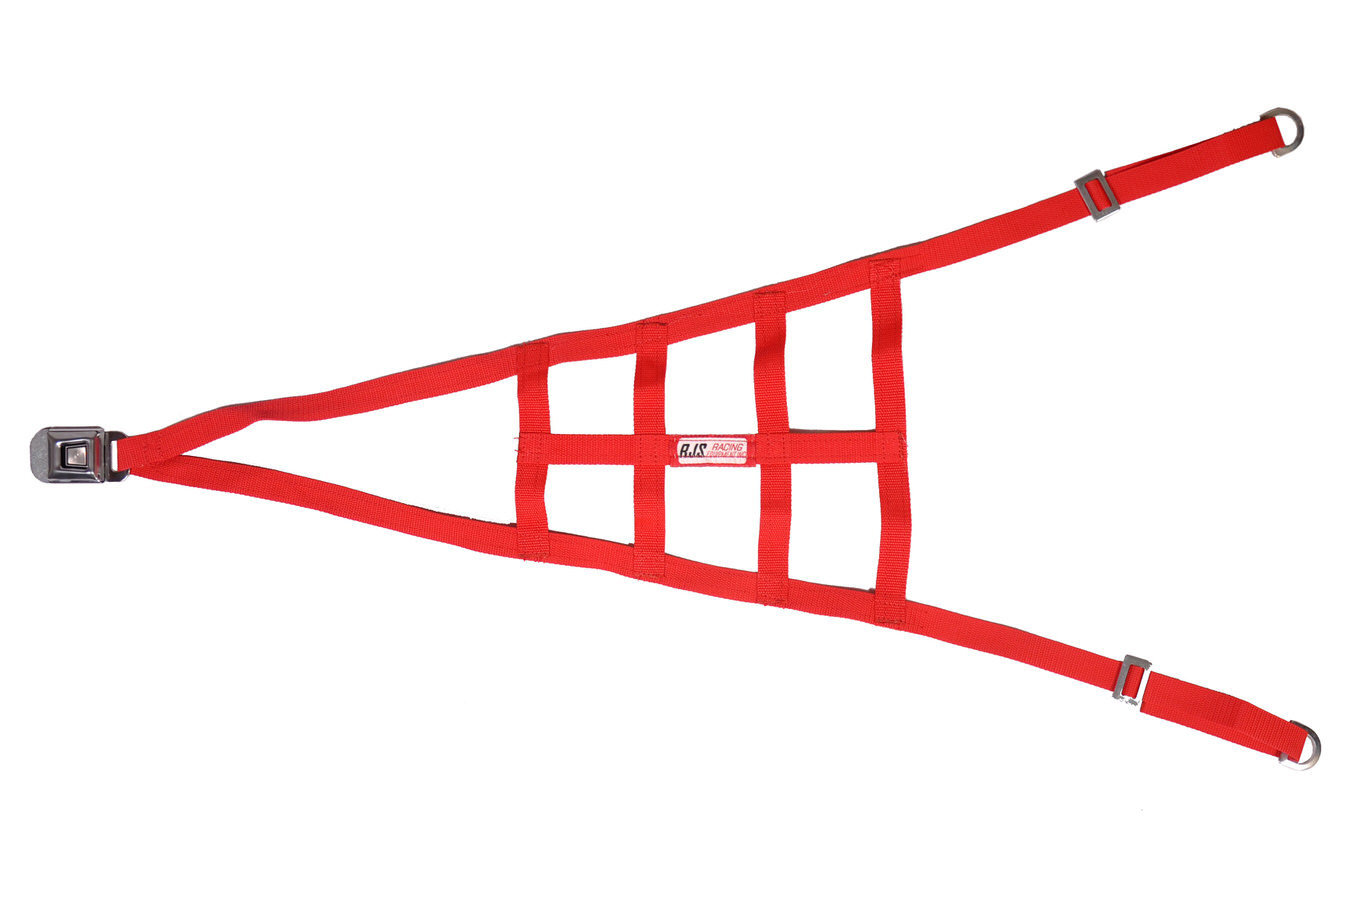 RJS Safety 10001504 Roll Cage Net, Nylon Webbing, Triangle, Red, Sprint Car, Kit